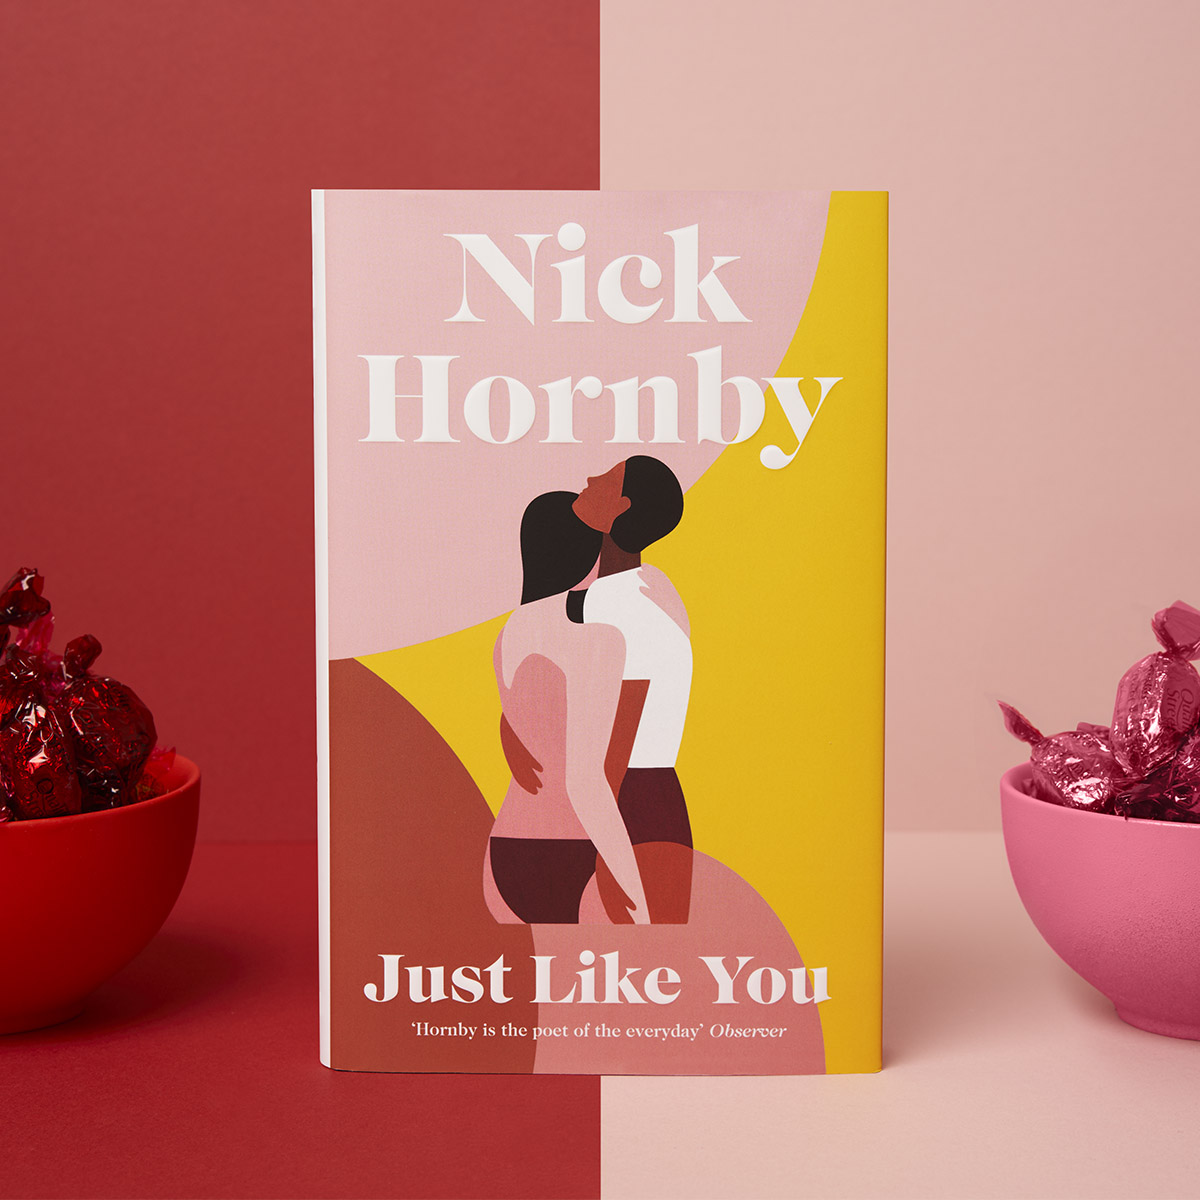 Image of Just Like You by Nick Hornby